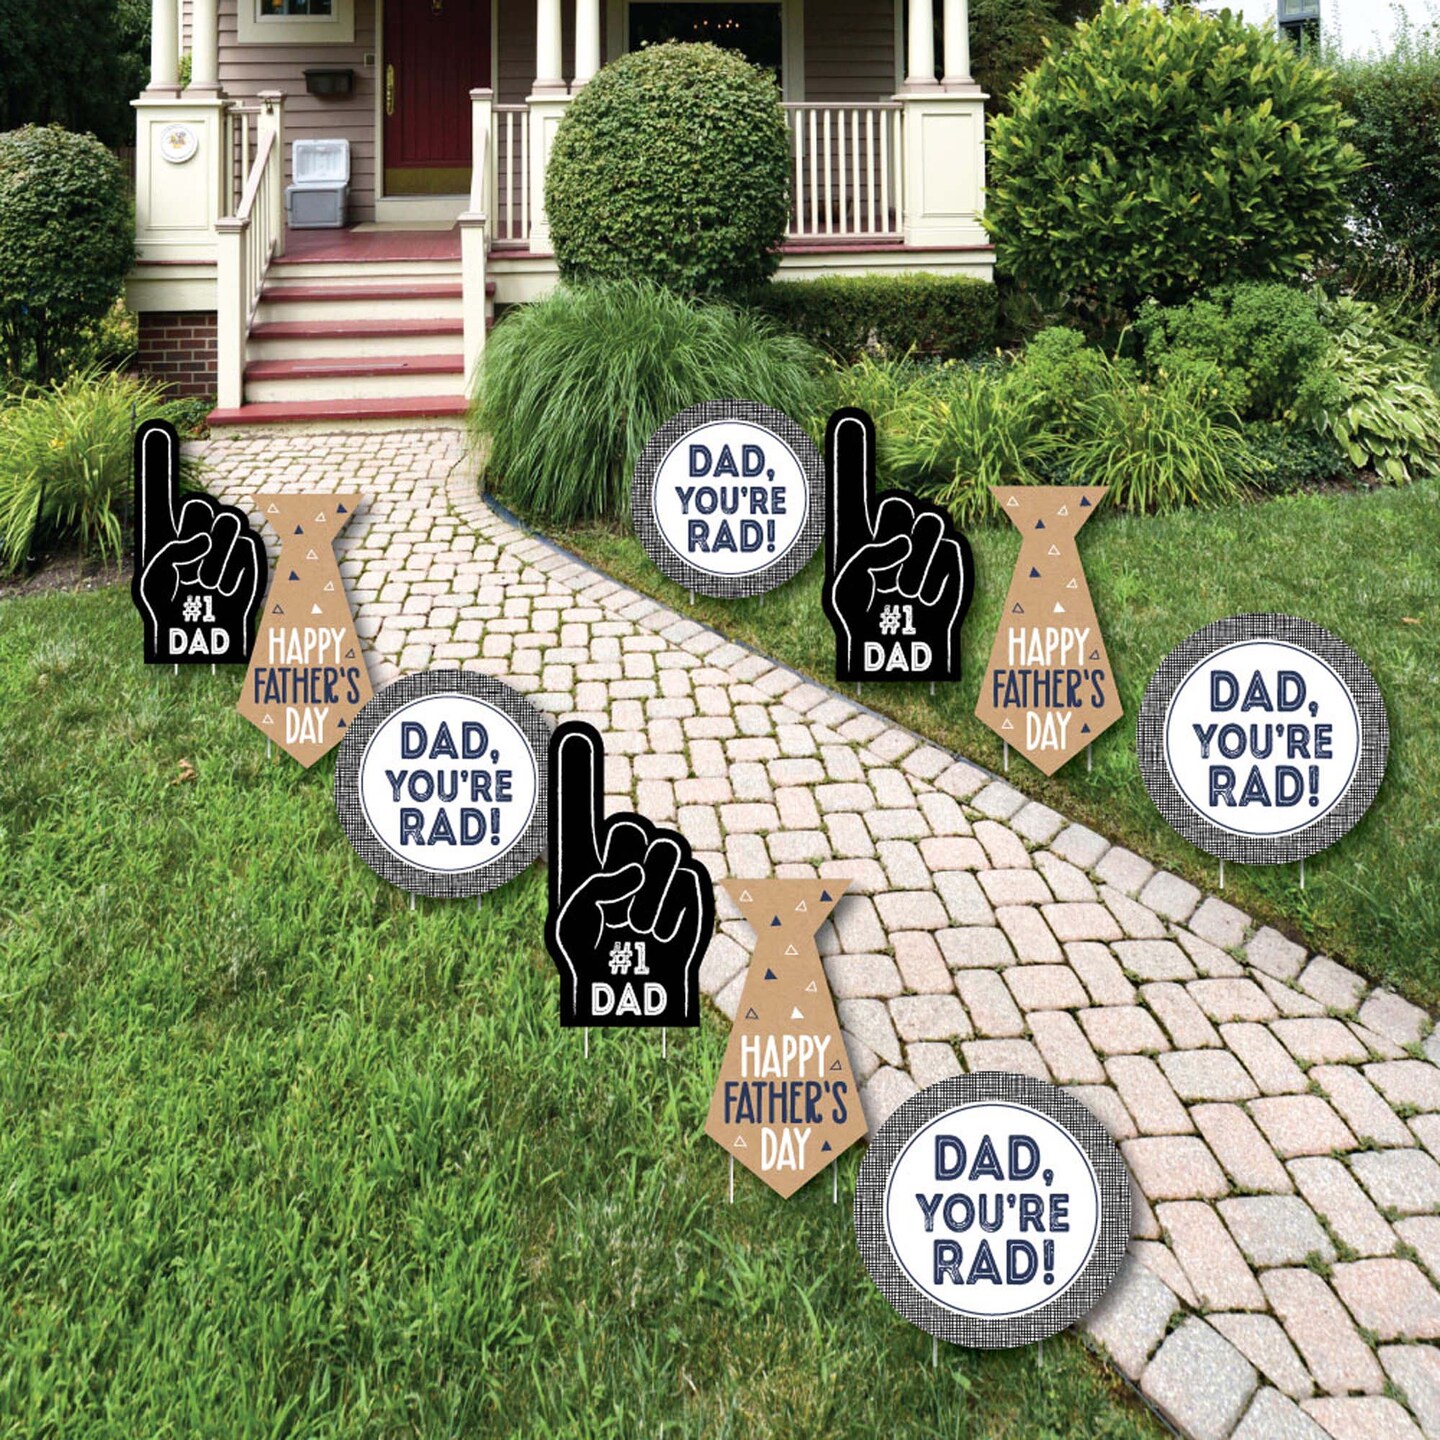 Big Dot of Happiness My Dad is Rad - Tie and Number 1 Dad Hand Lawn Decorations - Outdoor Father&#x27;s Day Yard Decorations - 10 Piece